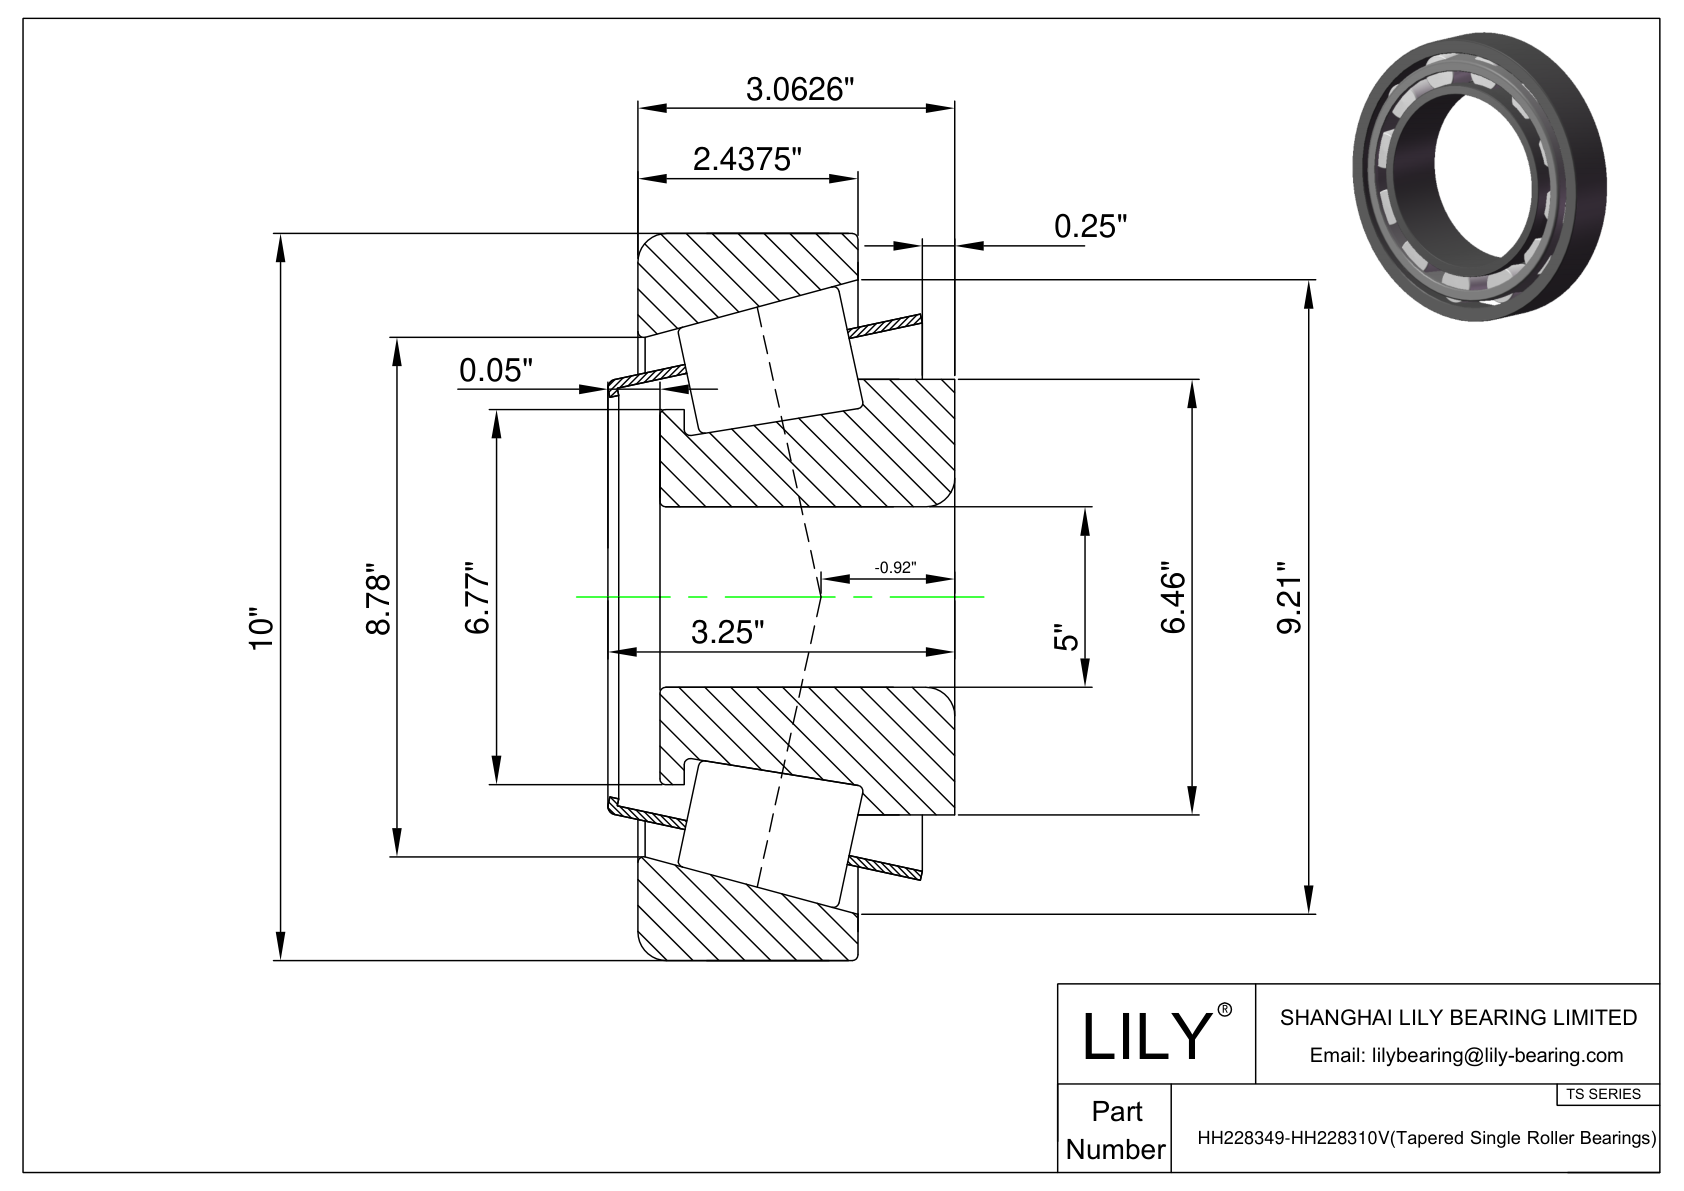 HH228349-HH228310V TS (Tapered Single Roller Bearings) (Imperial) cad drawing